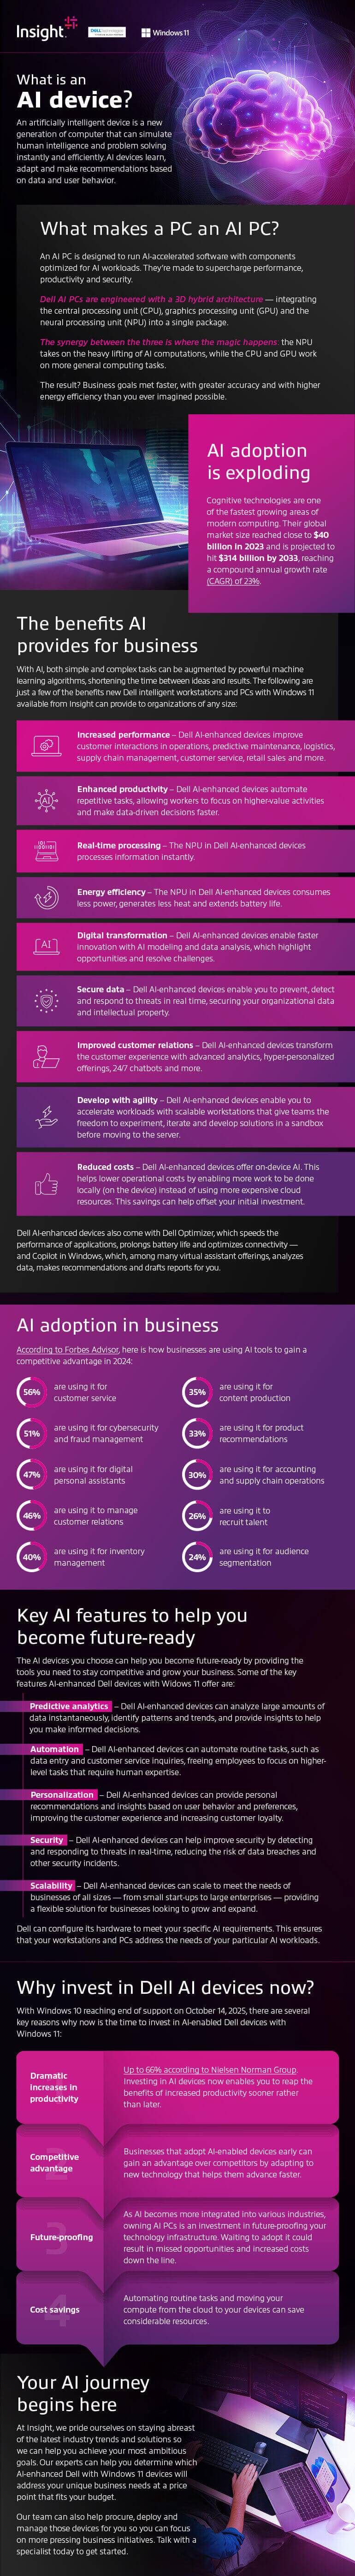 Future-proof your business with AI devices from Dell Technologies Infographic as transcribed below